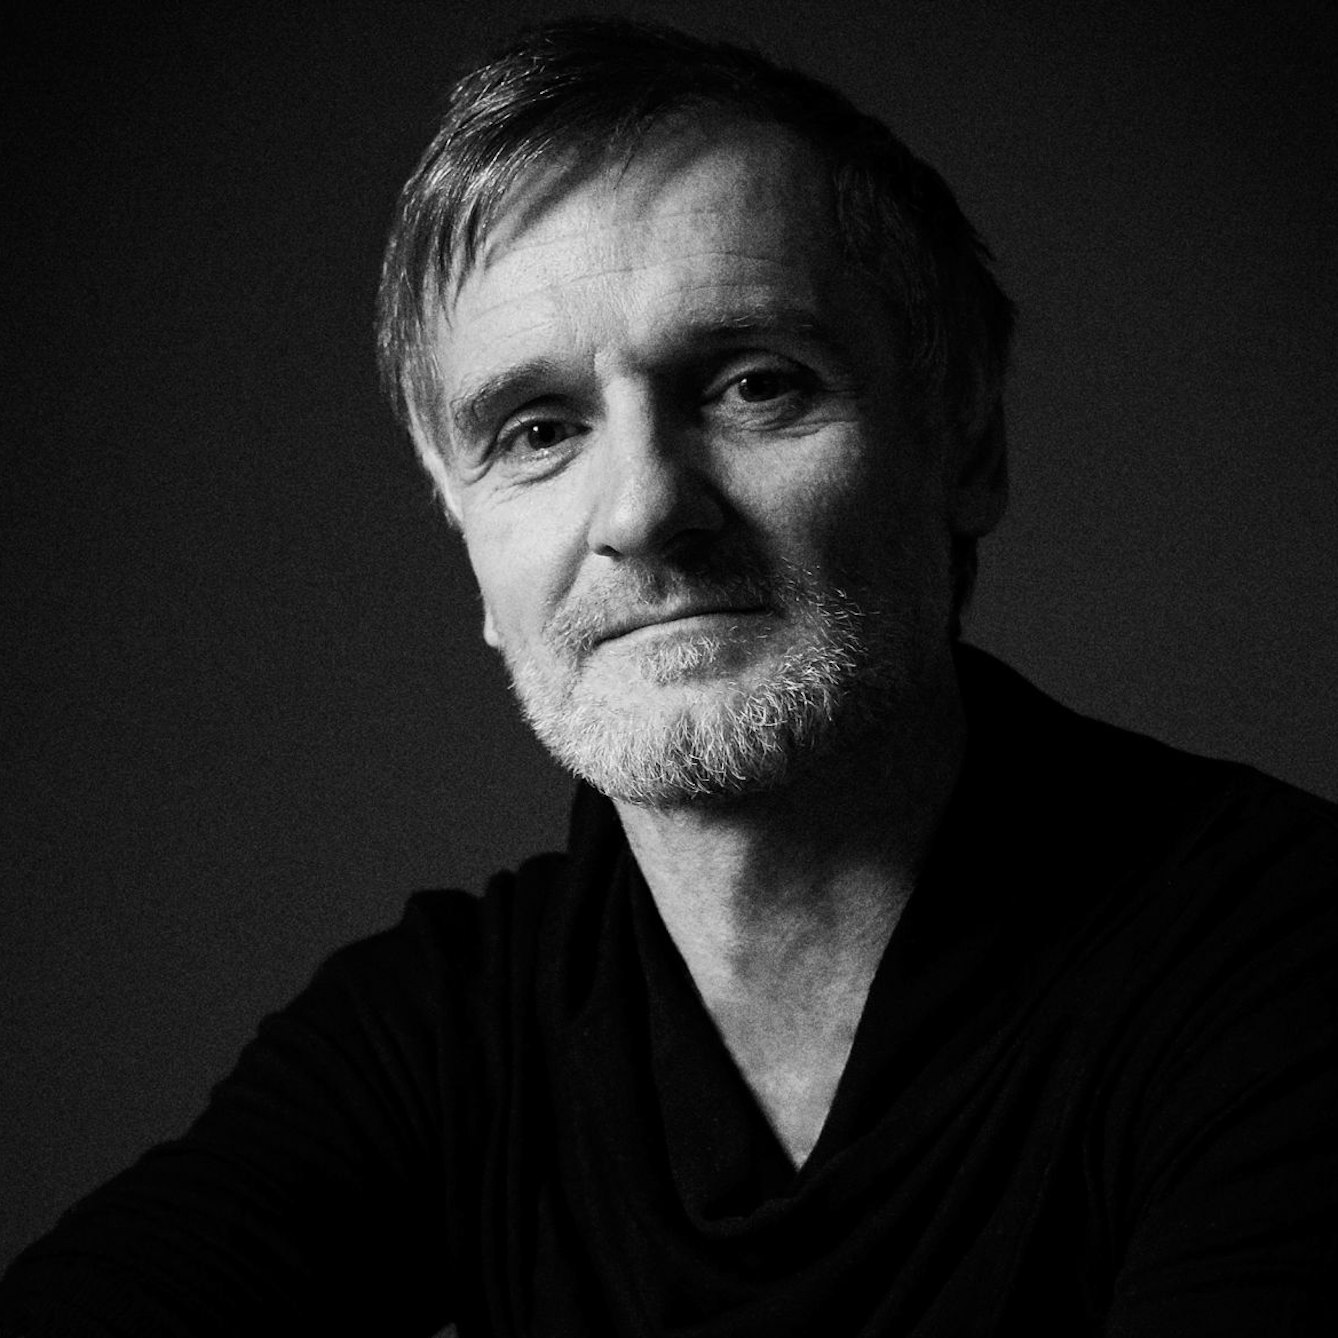 Photographic black and white, head and shoulders portrait of Matjaž Krivic.